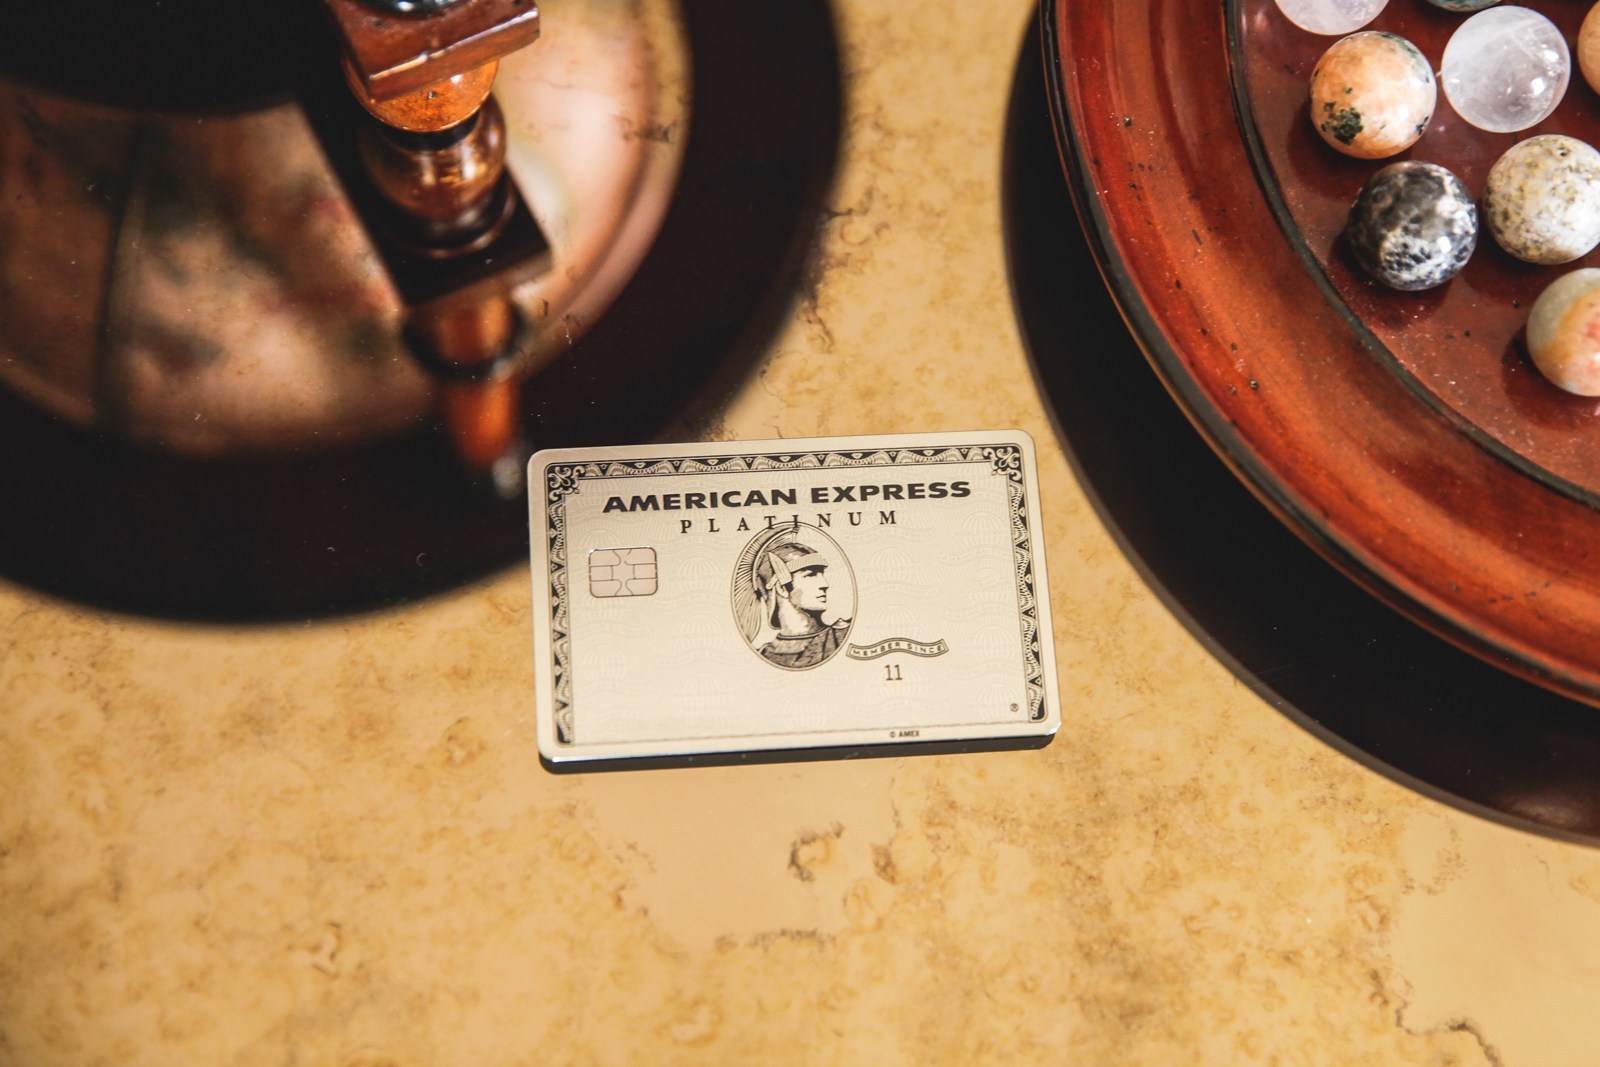 All the ways the Amex Platinum card tries to make you feel like an A